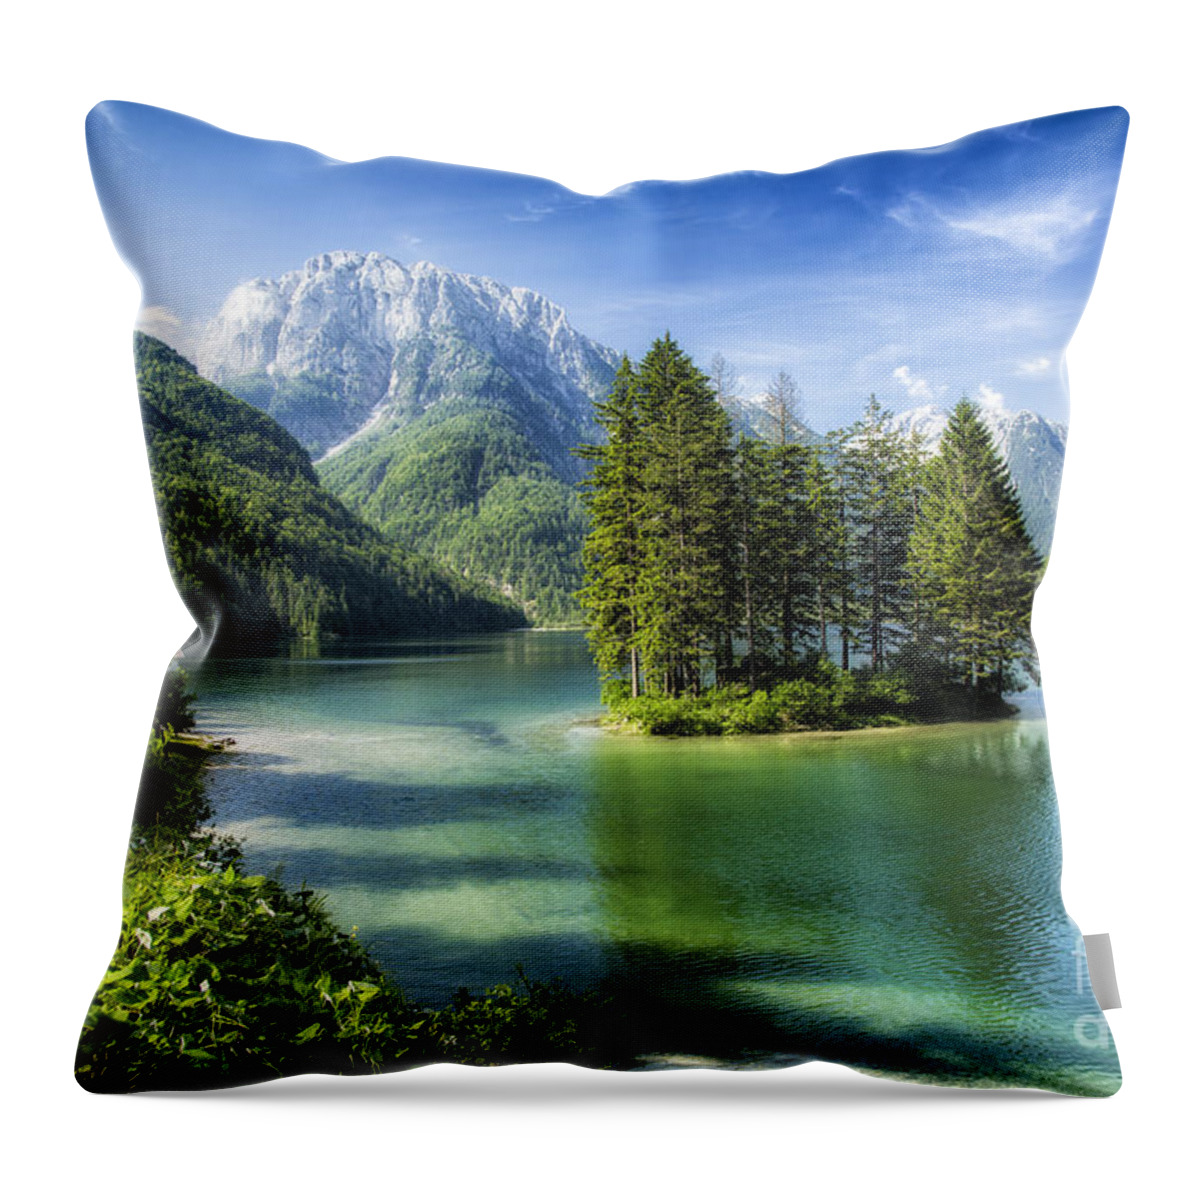 Italy Throw Pillow featuring the photograph Italian Island by Timothy Hacker